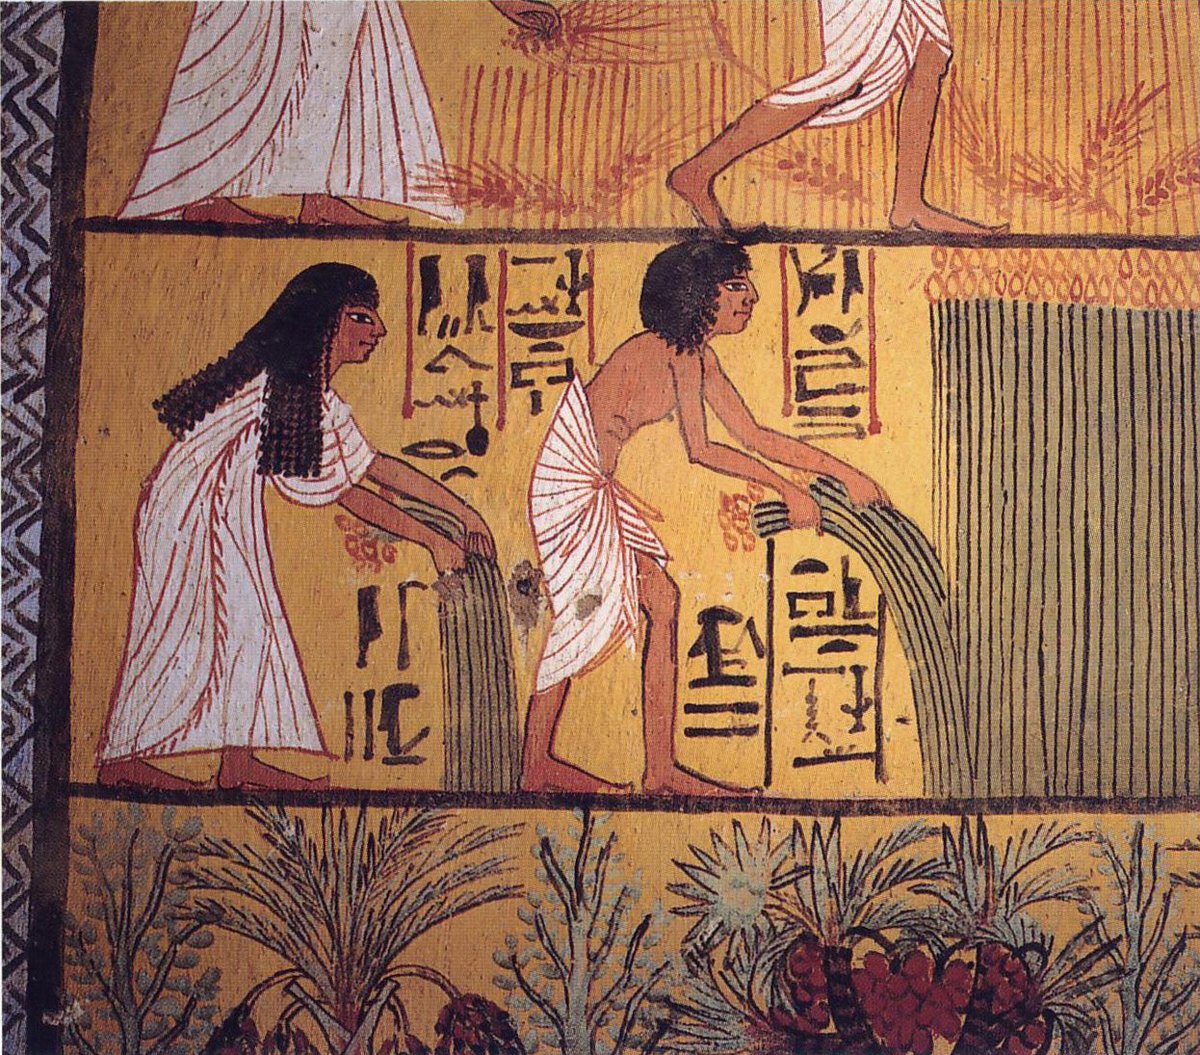 Ancient Egyptian peasants harvesting papyrus from the 19th dynasty.